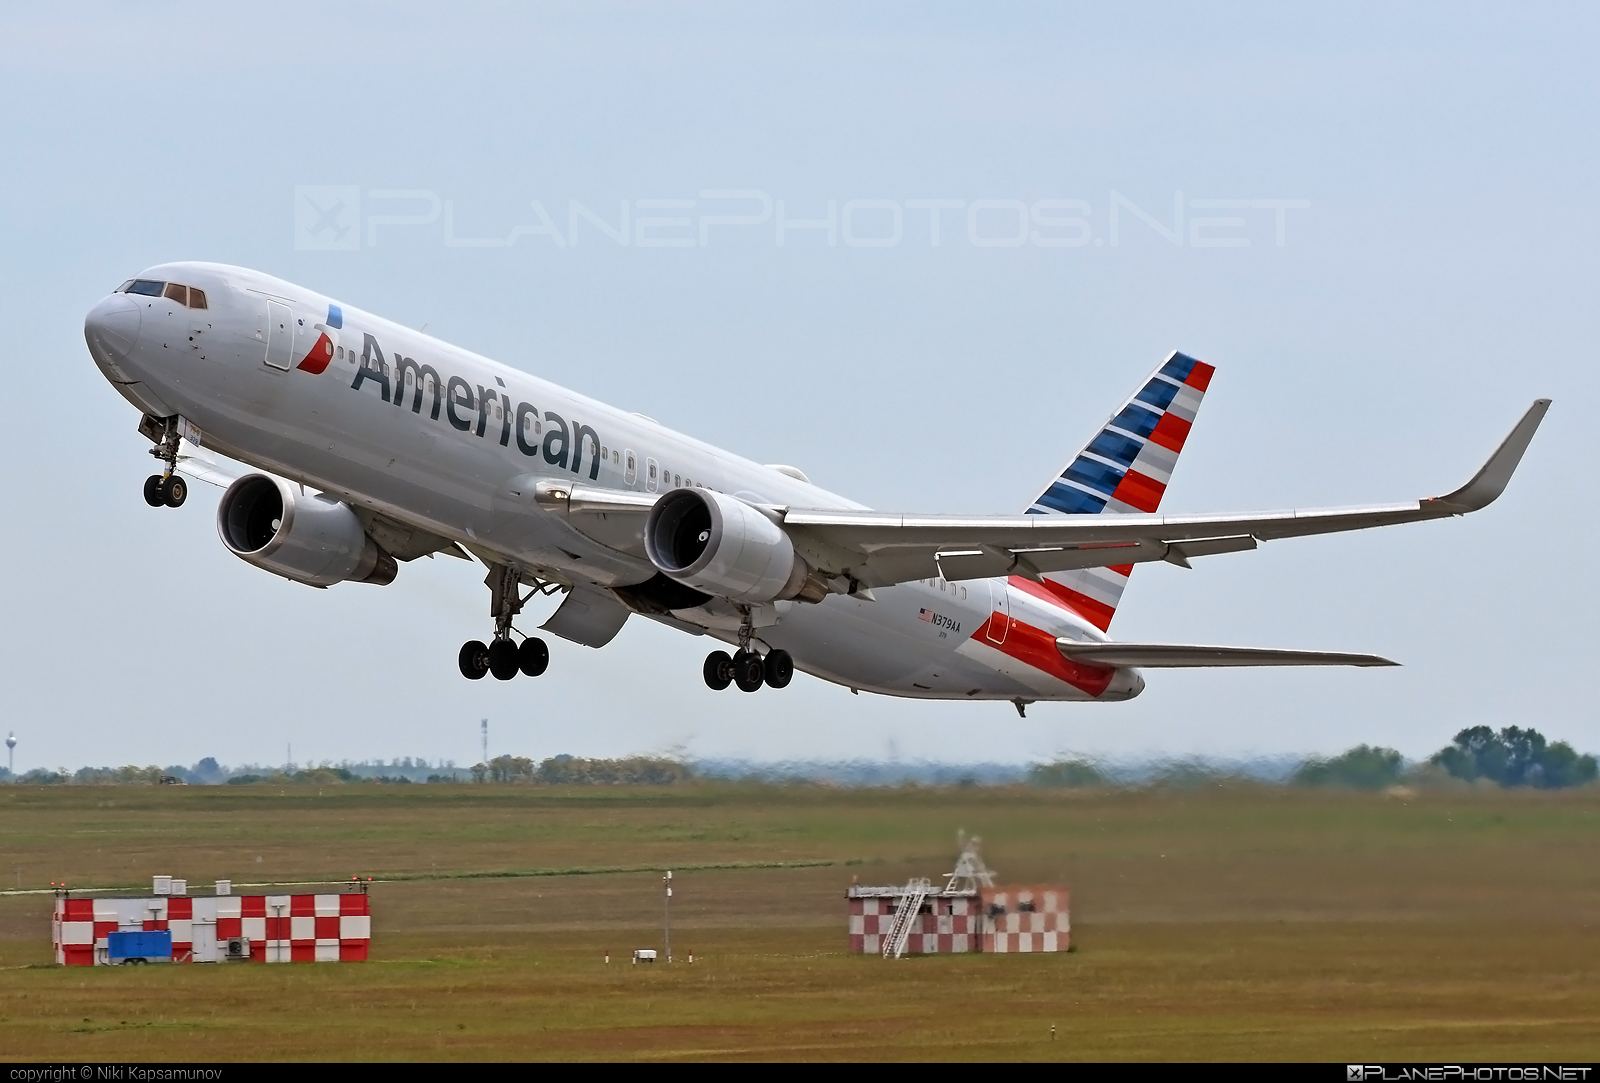 Boeing 767-300ER - N379AA operated by American Airlines #americanairlines #b767 #b767er #boeing #boeing767